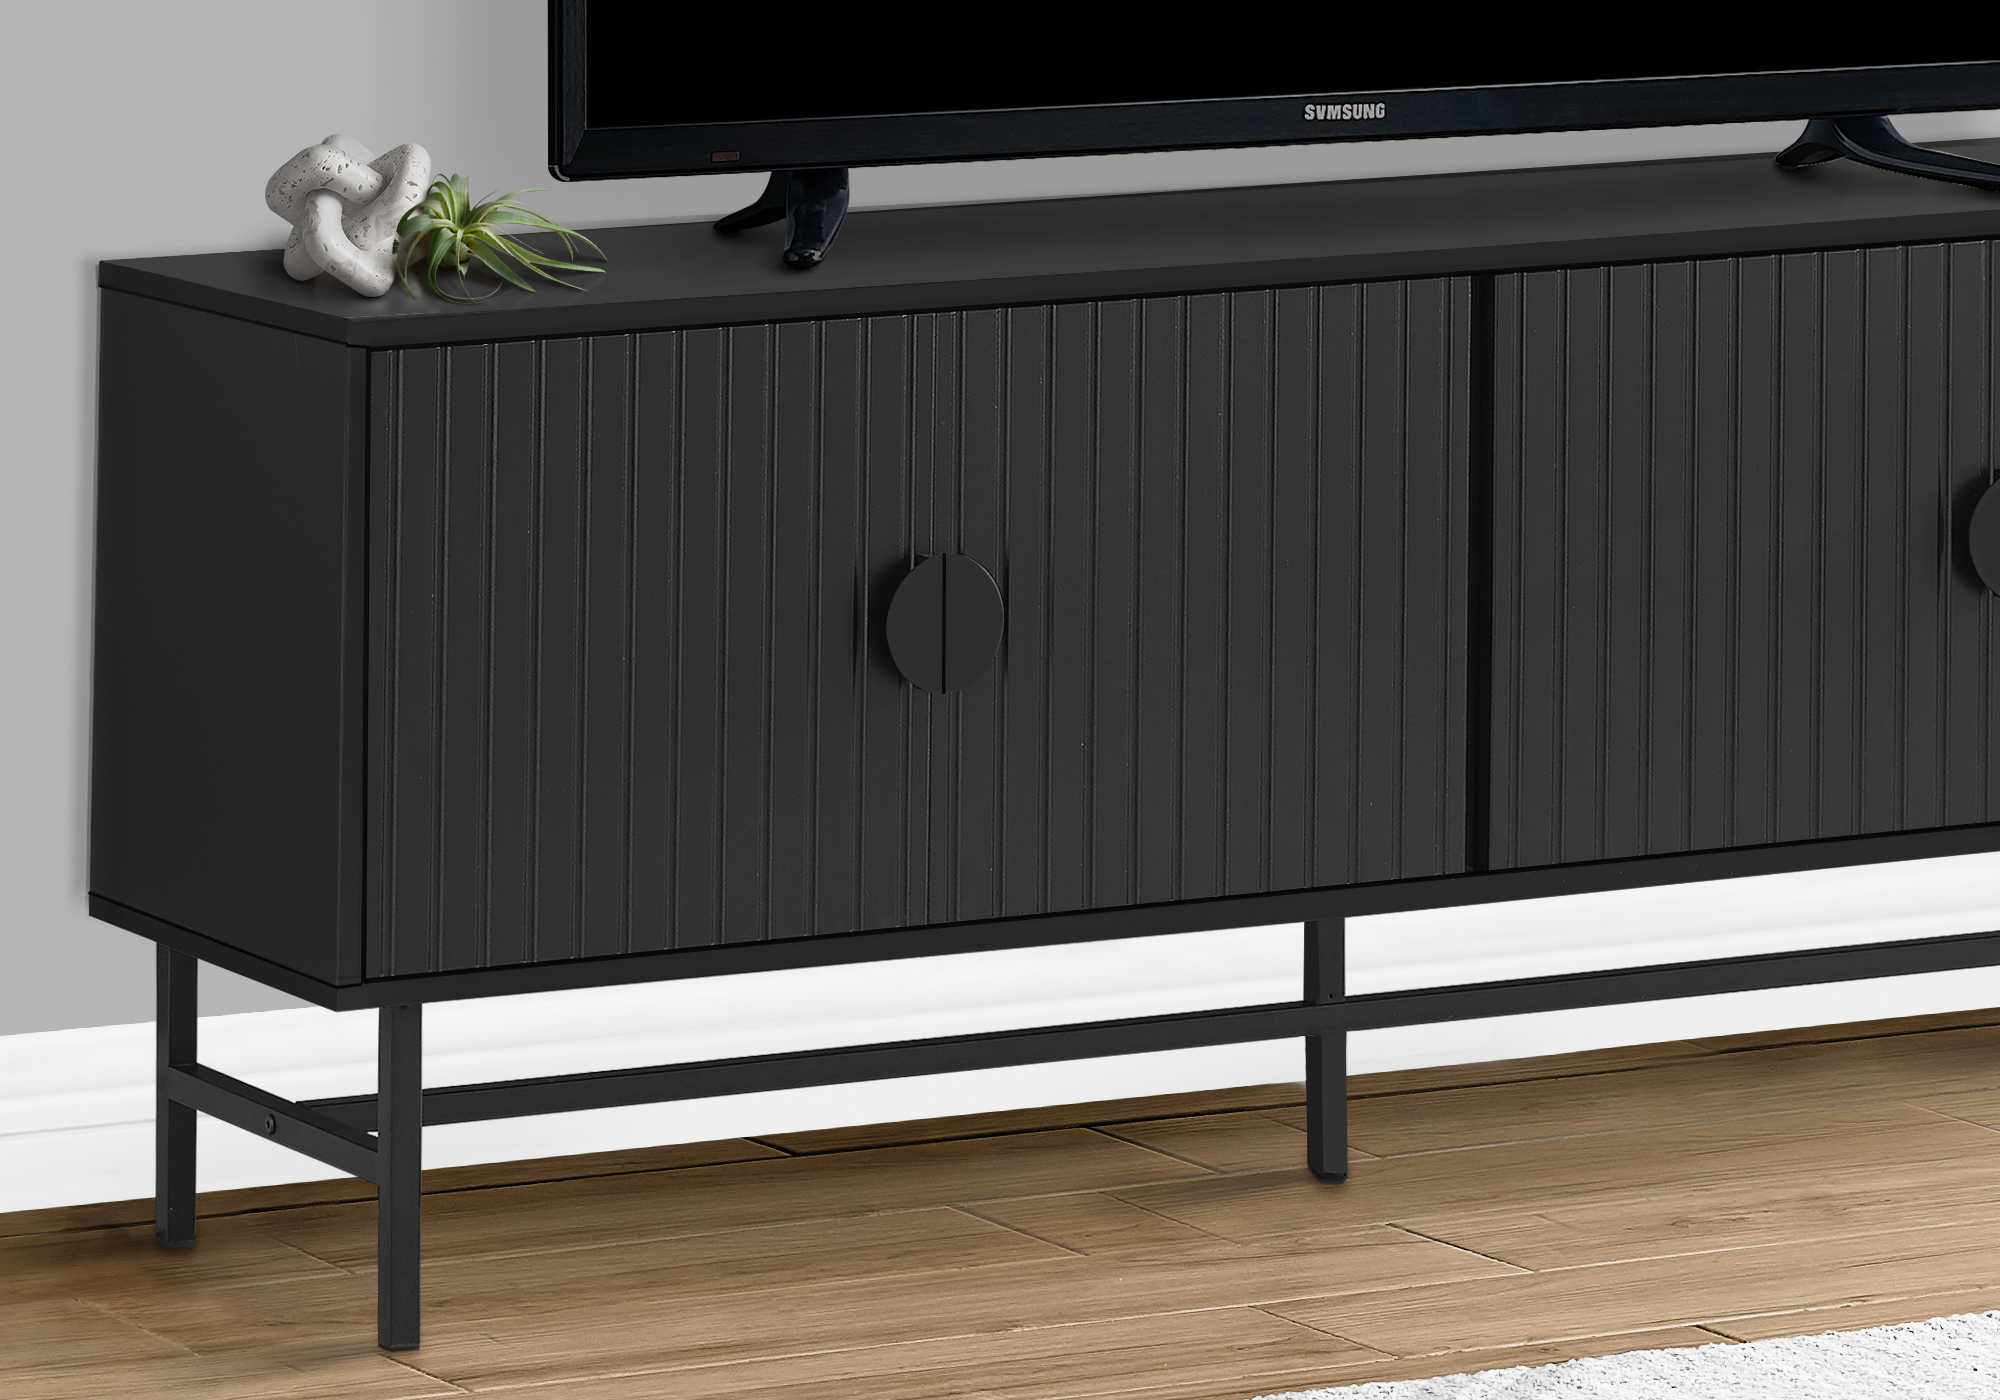 TV STAND - 60"L / BLACK WITH BLACK METAL